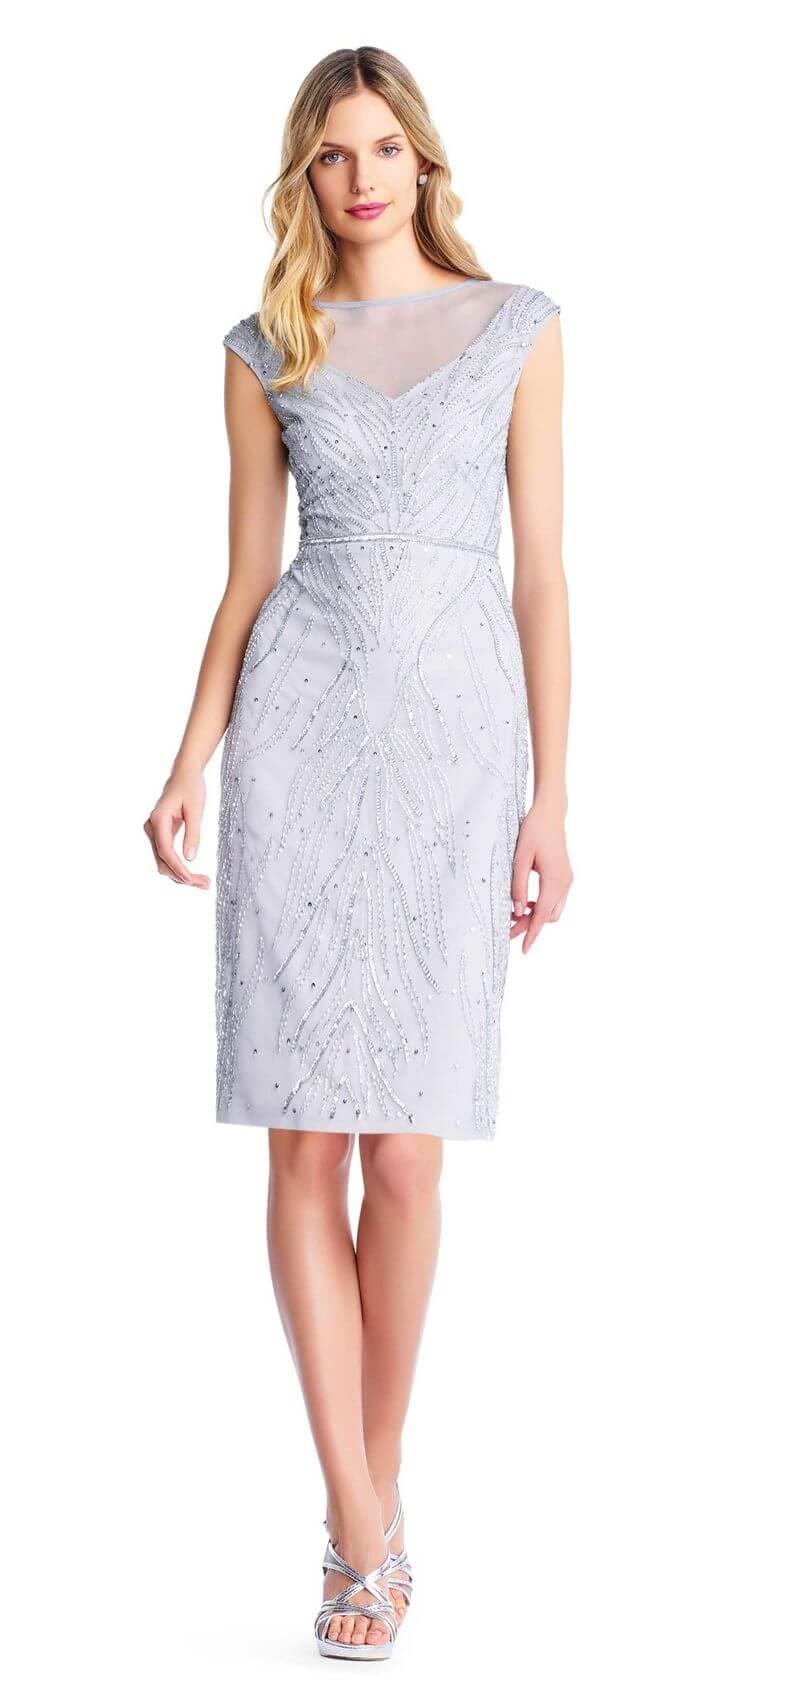 adrianna papell cocktail dresses